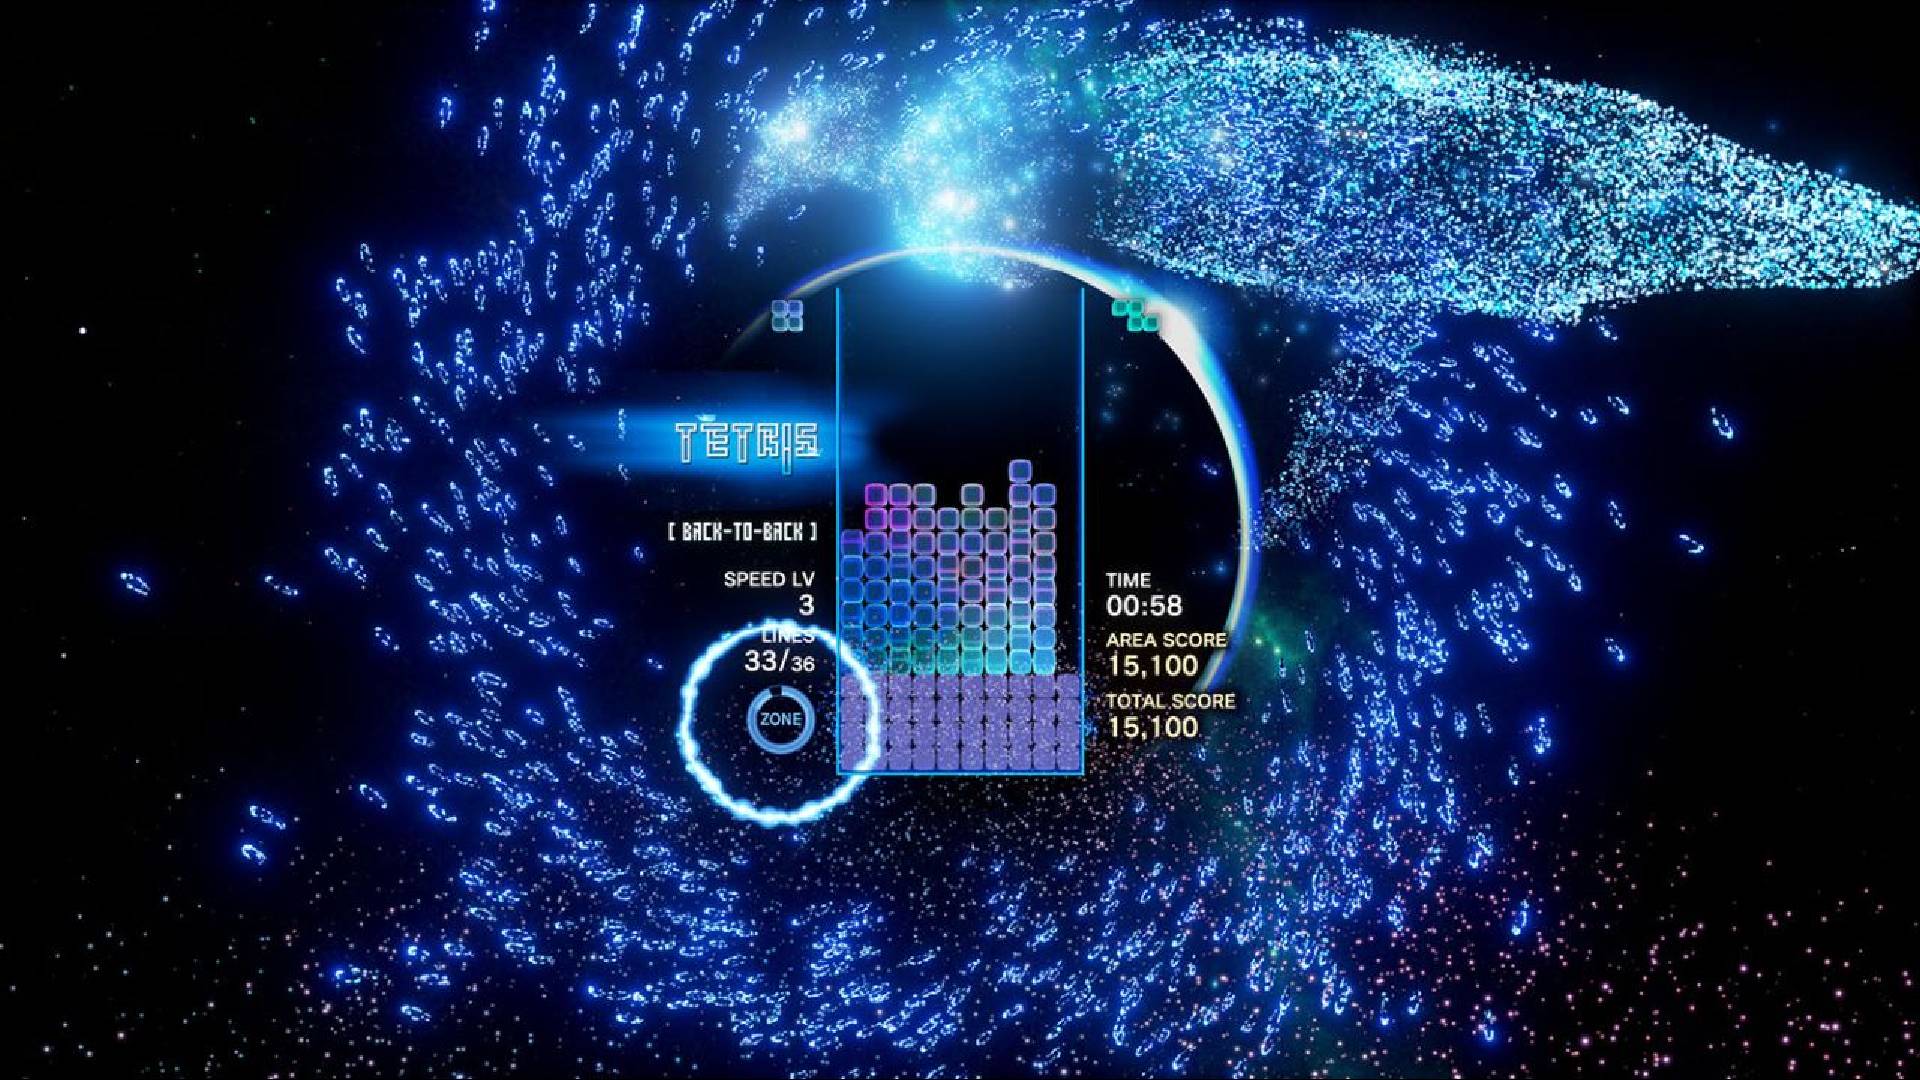 Best music games: a game of tetris is being played while wild visuals flurry around